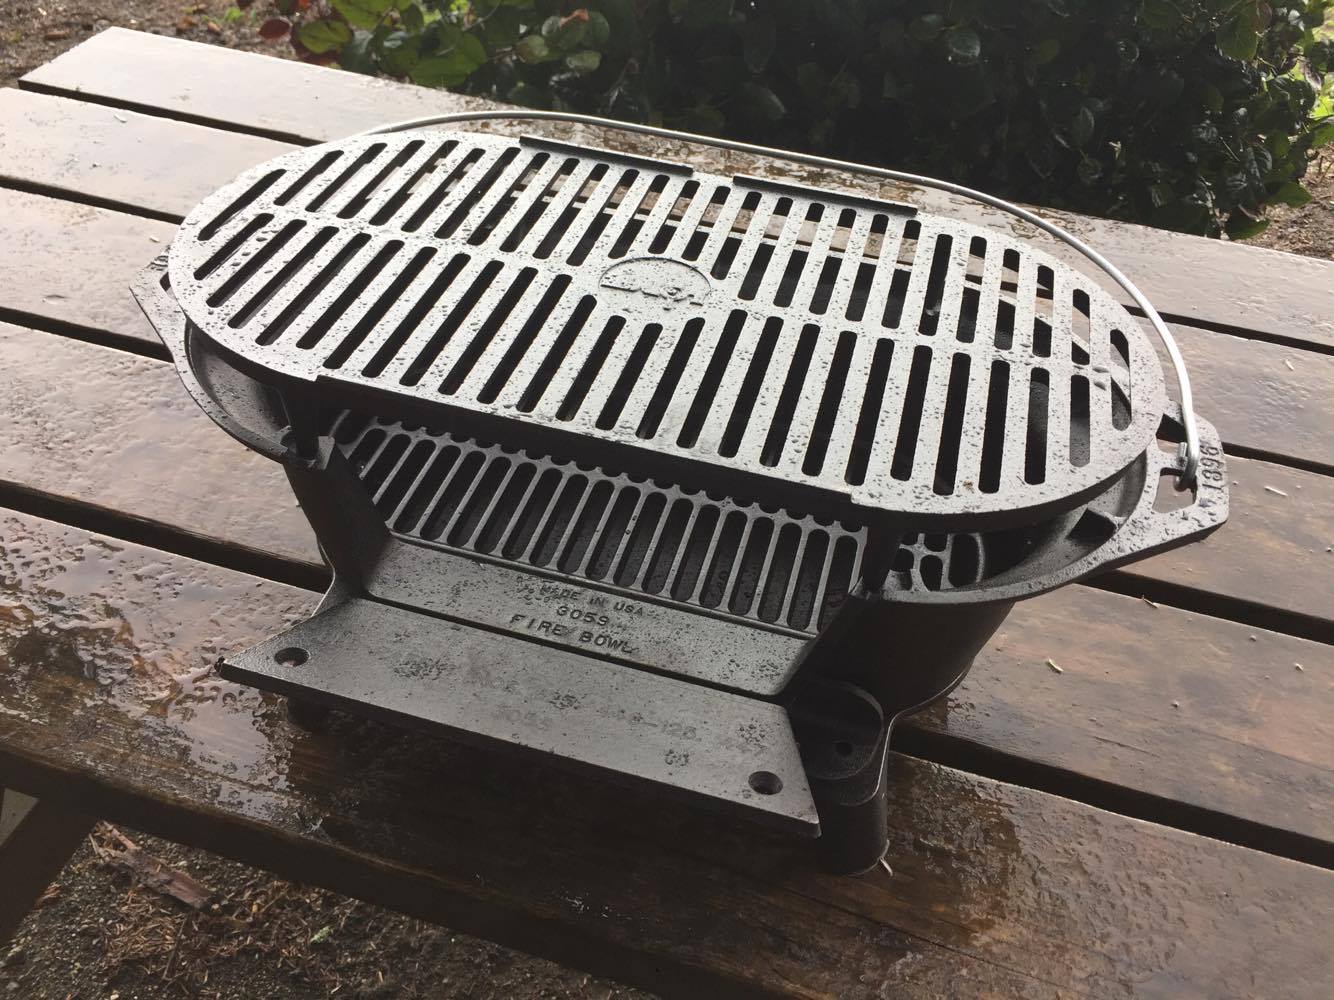 Grill Review: Lodge L410 Pre-Seasoned Sportsman's Charcoal Grill - Grill  Girl